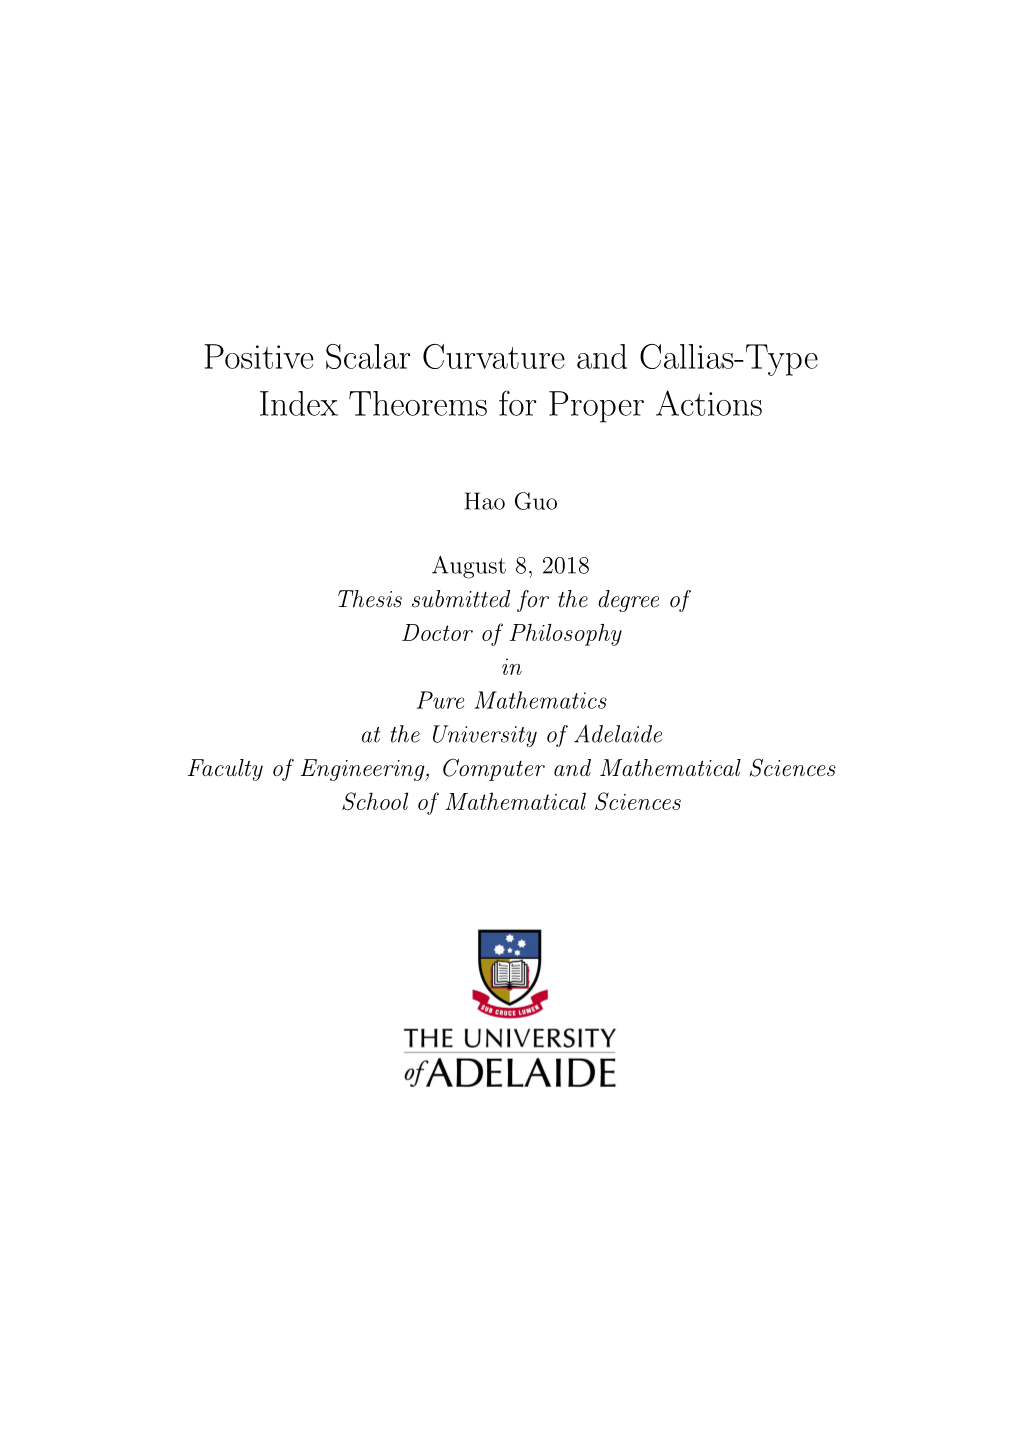 Positive Scalar Curvature and Callias-Type Index Theorems for Proper Actions